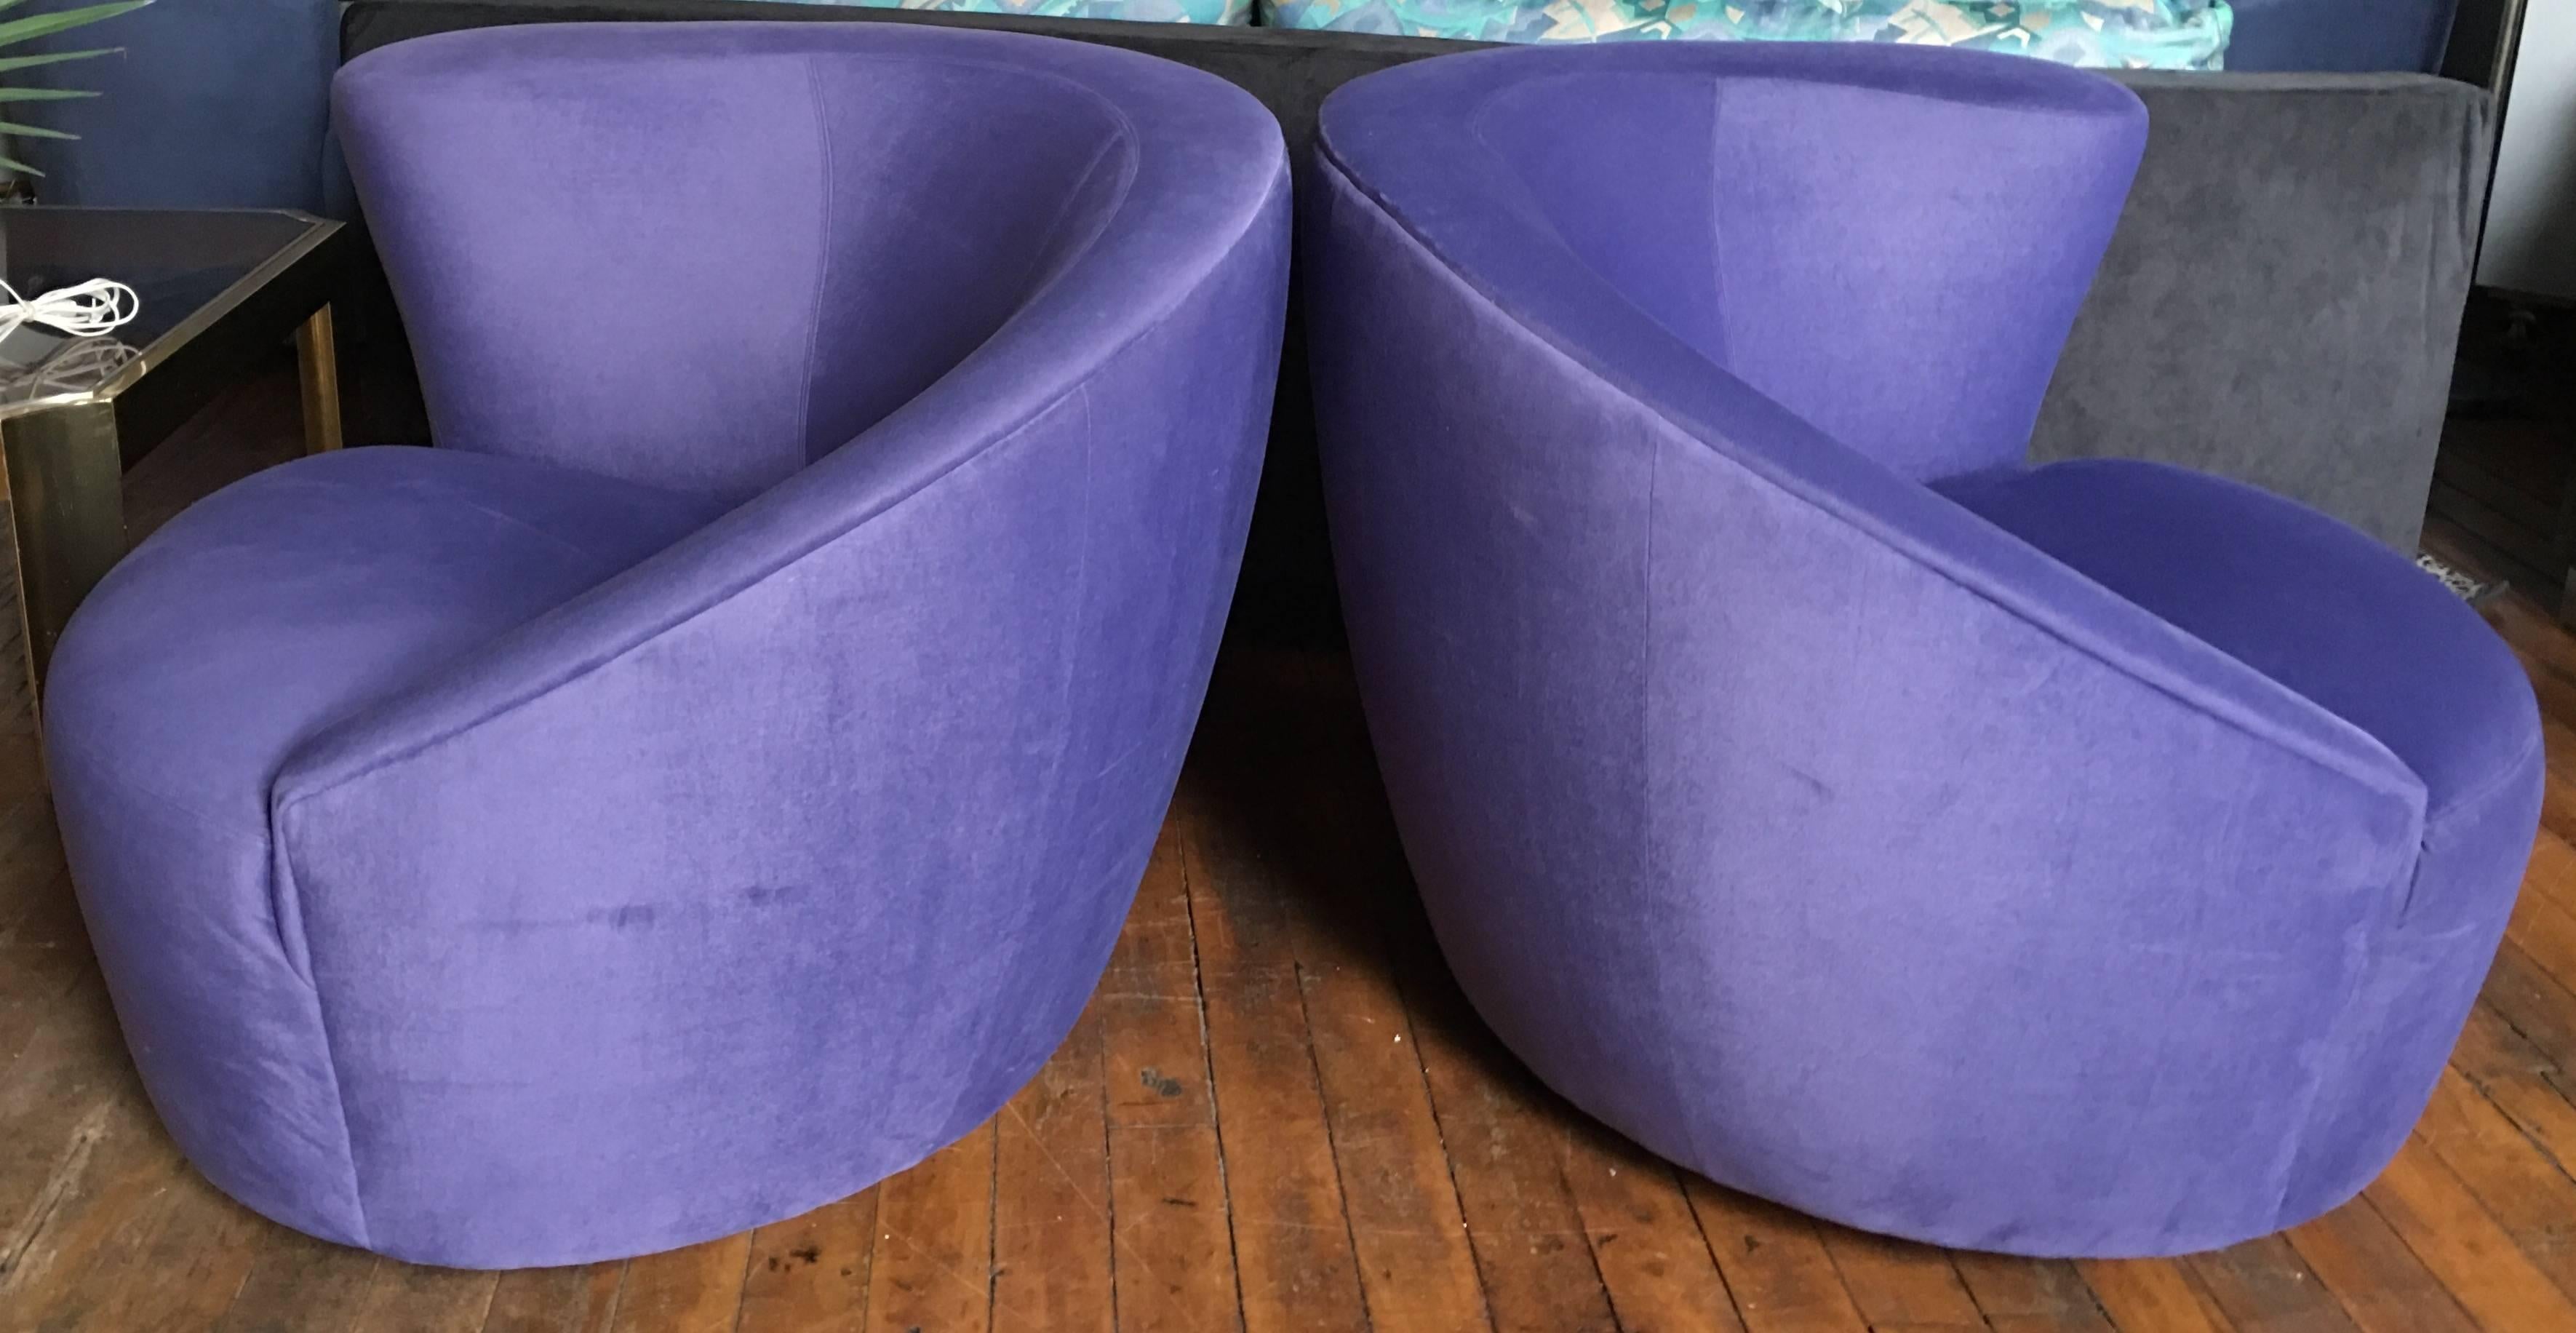 Pair of Nautilus swivel lounge chairs designed by Vladimir Kagan for Weiman Preview. Chairs feature original lavender/purple tone ultra suede upholstery. Swivel bases rotate 180 degrees and return to original position when released. Original Weiman